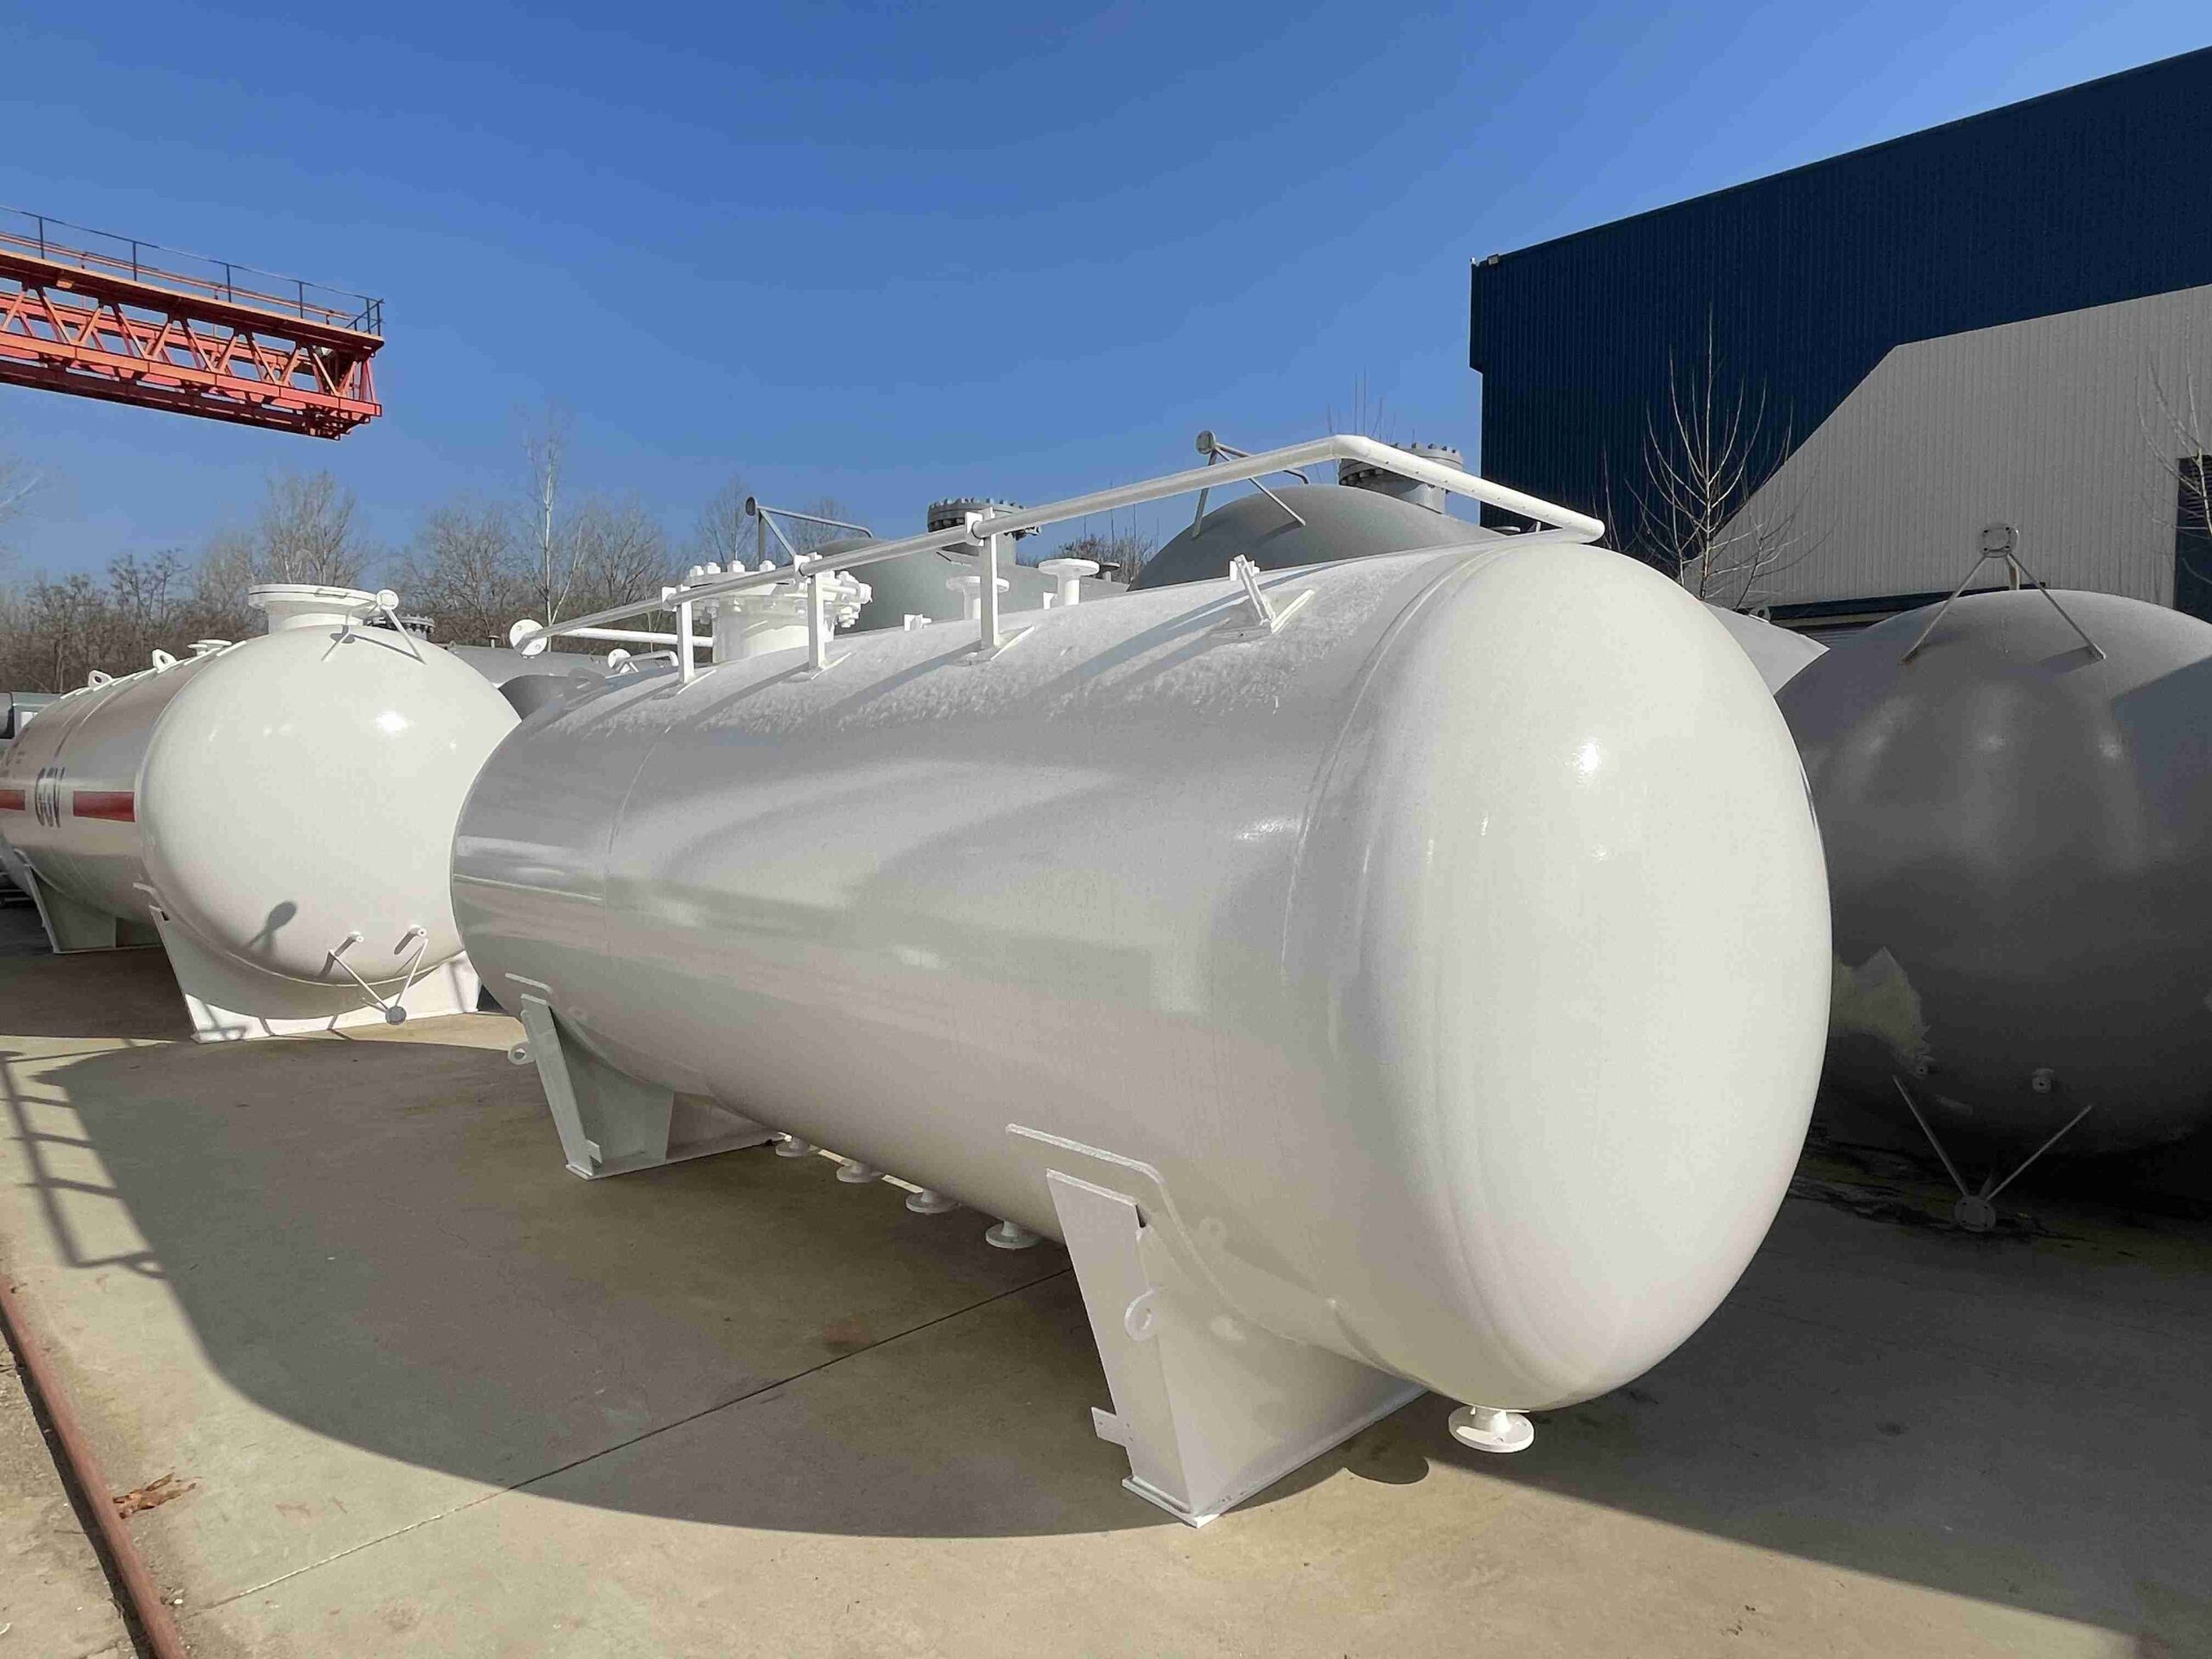 The Future of Fuel Storage: Trends in Cryogenic Tank Innovation